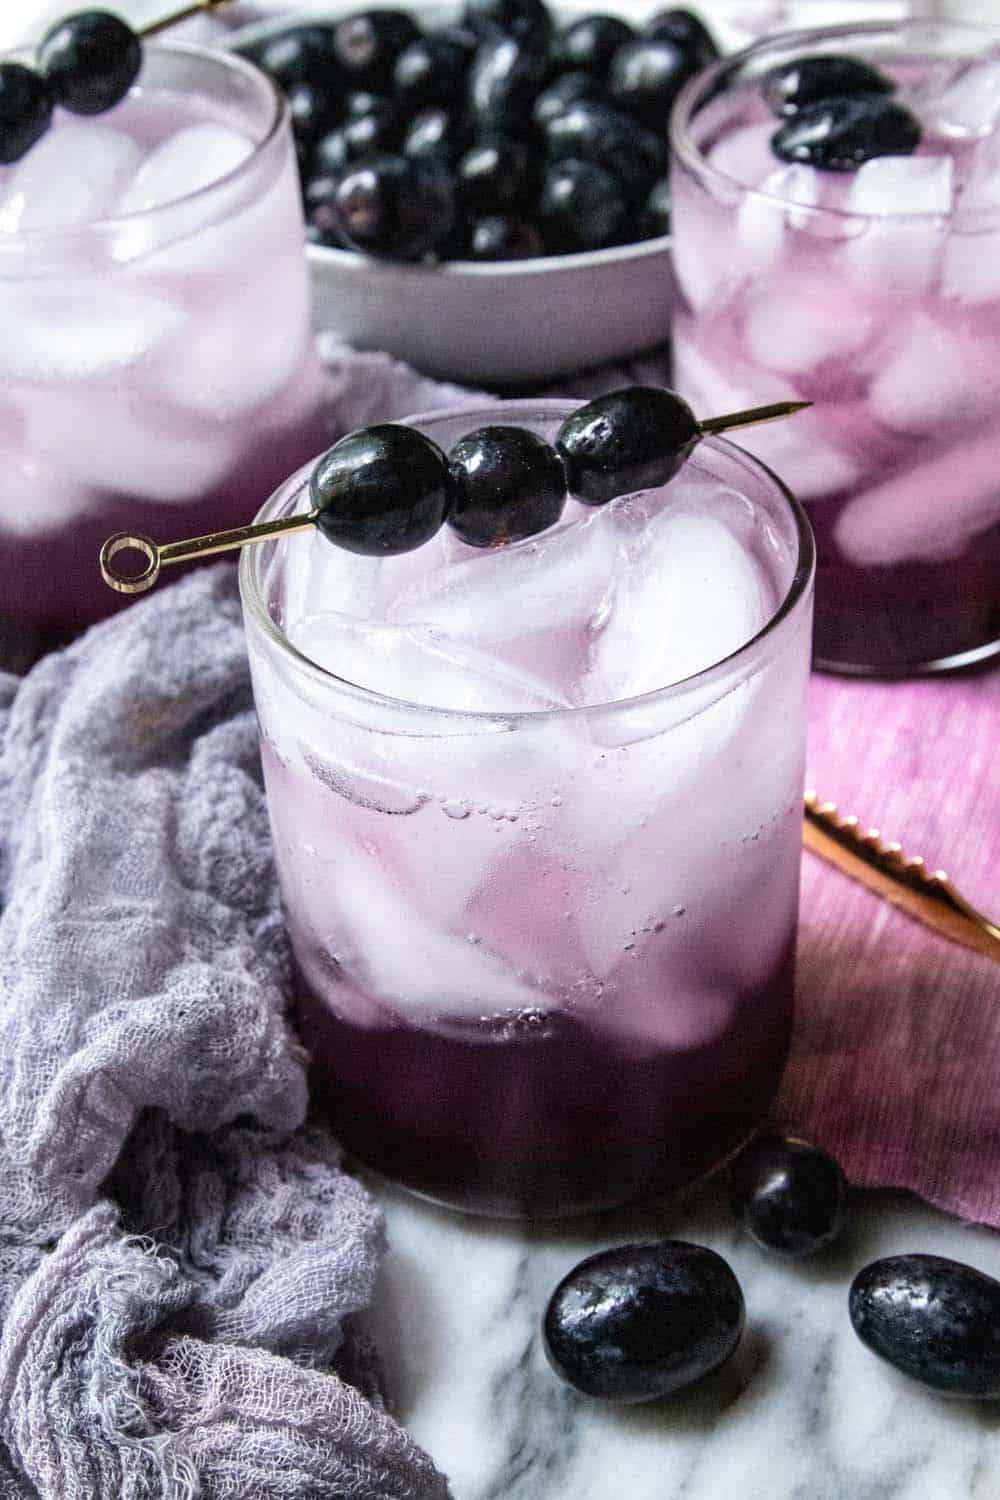 What Is A Shrub Anyway? How To Make Your Own Grape Soda